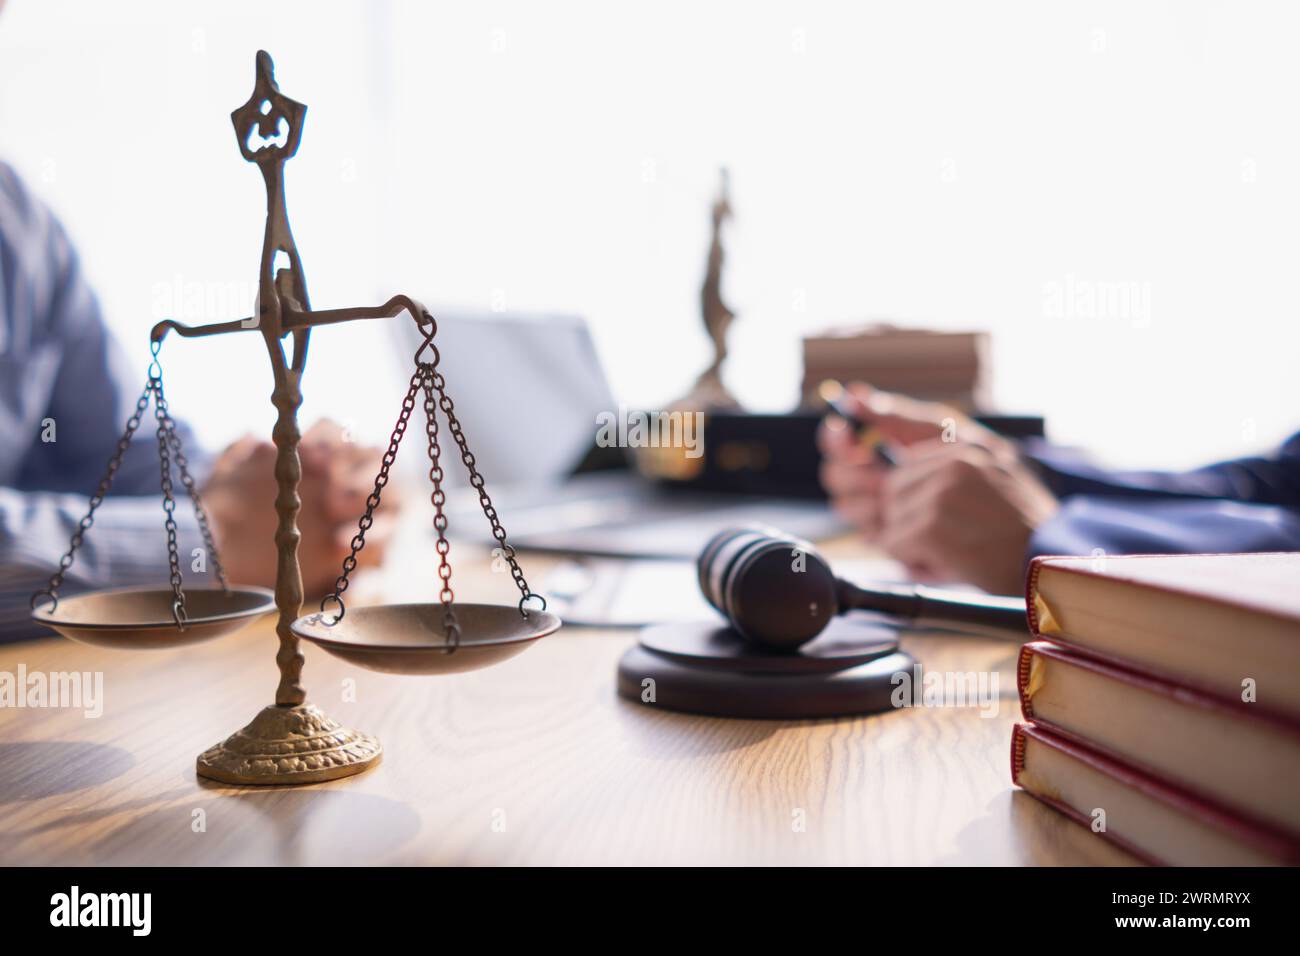 Brass scales are placed on lawyers desks in legal advice offices as a symbol of fairness and integrity in the High Court decision making. Brass scales Stock Photo